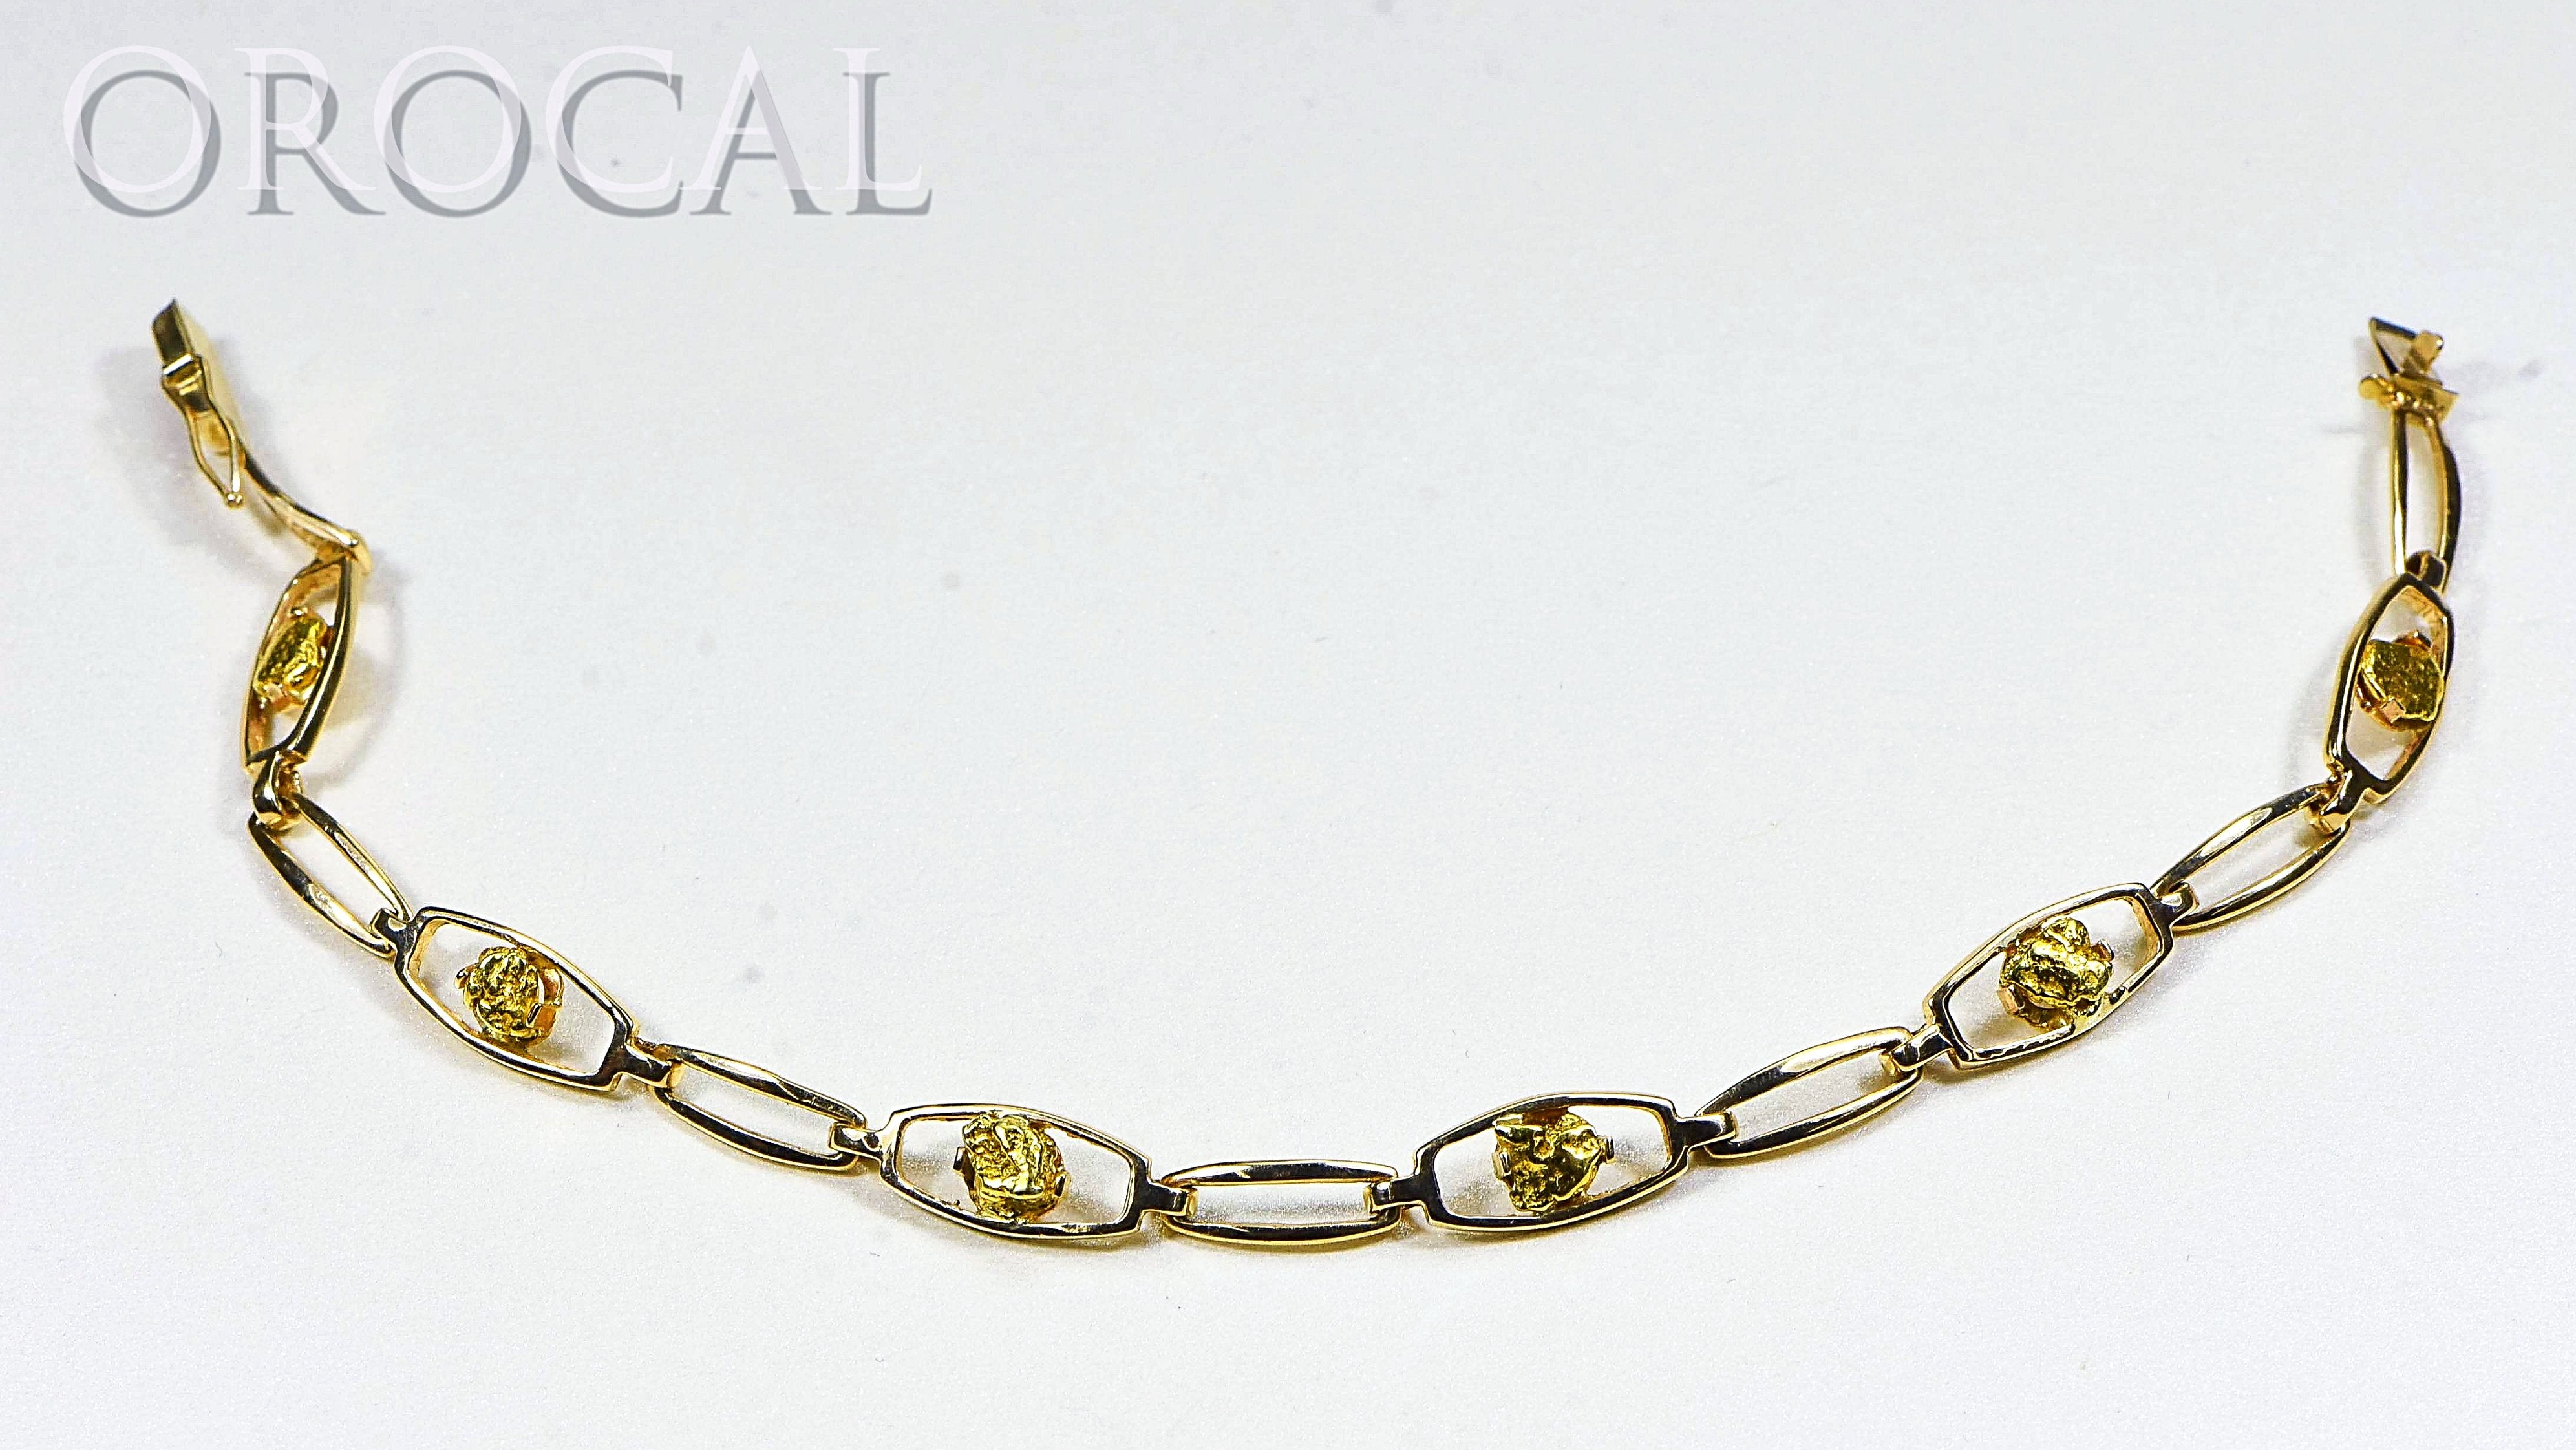 Gold Nugget Bracelet "Orocal" BDLOV5LHNC89 Genuine Hand Crafted Jewelry - 14K Gold Casting